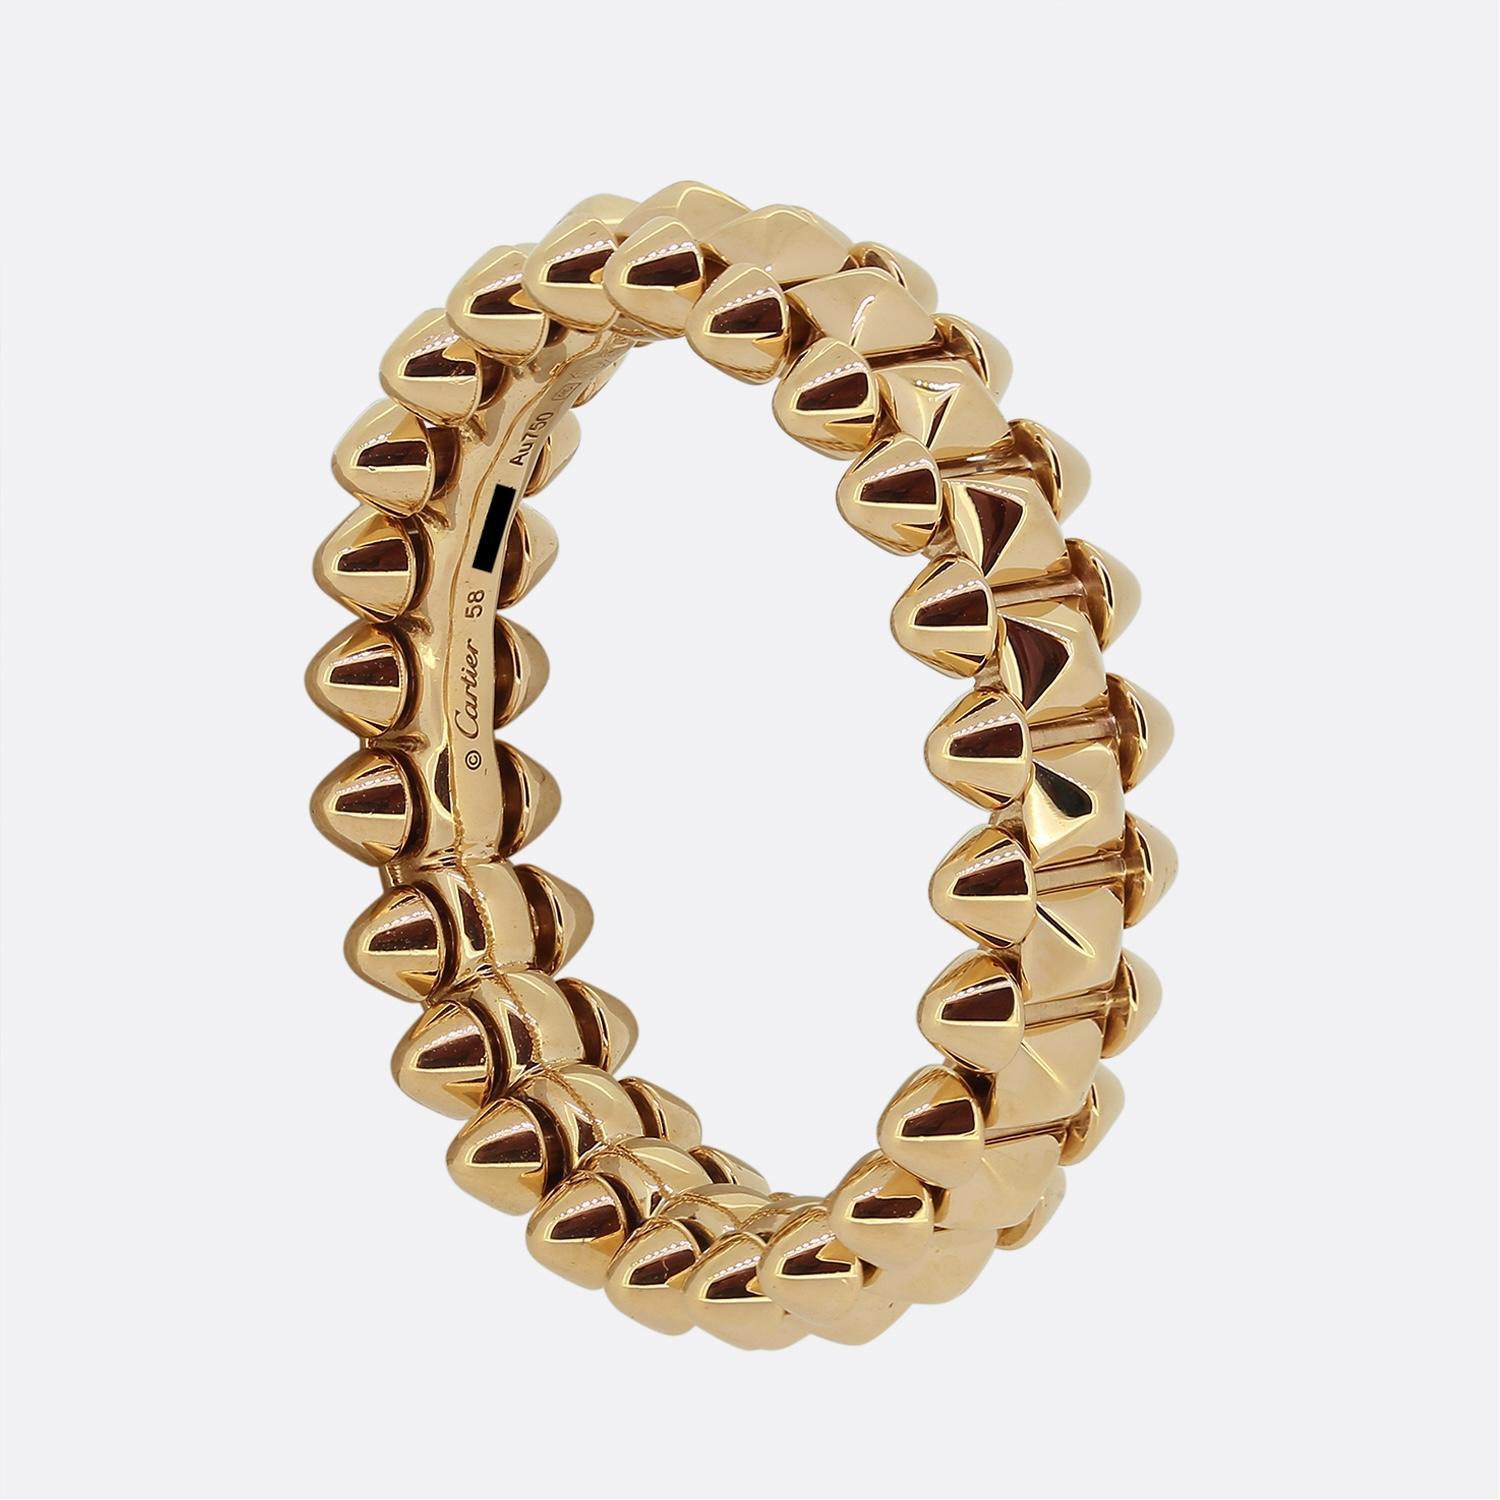 Here we have a daring piece from the world renowned jewellery house of Cartier. This ring has been crafted from 18ct rose gold and forms part of their iconic 'Clash de Cartier' collection to showcase a studded design which appears sharp but is